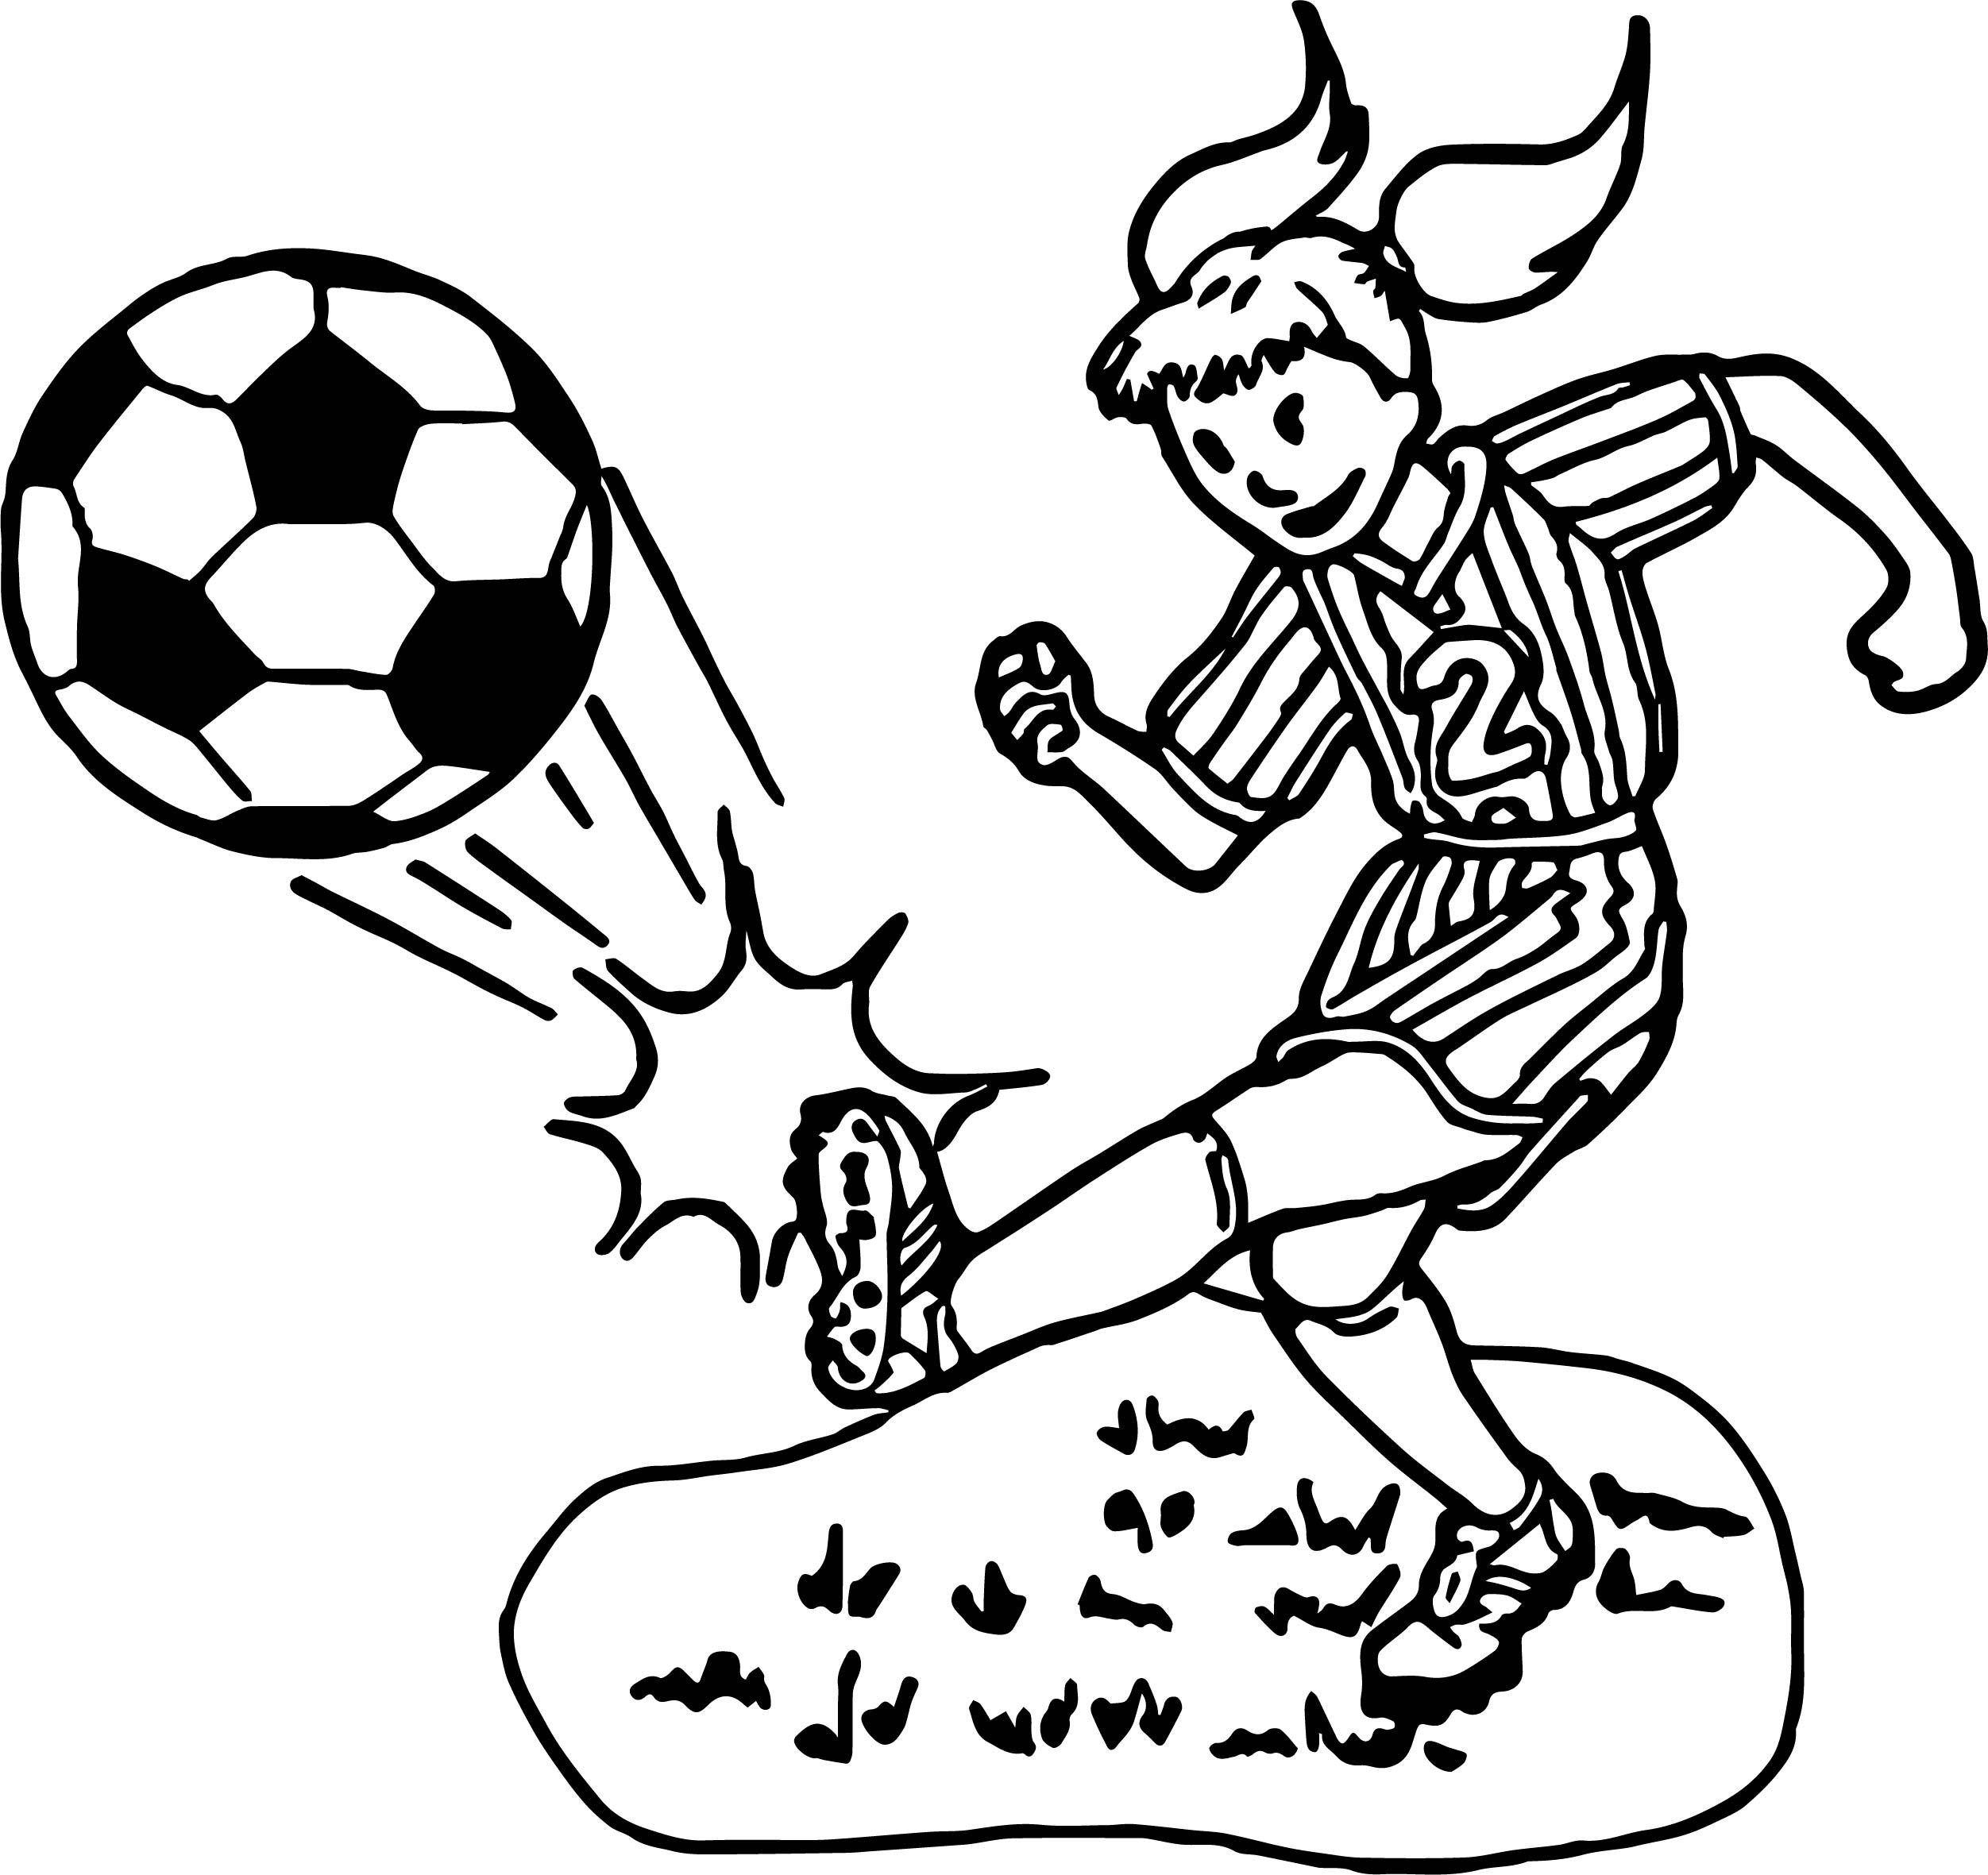 Girl Soccer Player Coloring Pages
 Kid Girl Playing Soccer Playing Football Coloring Page